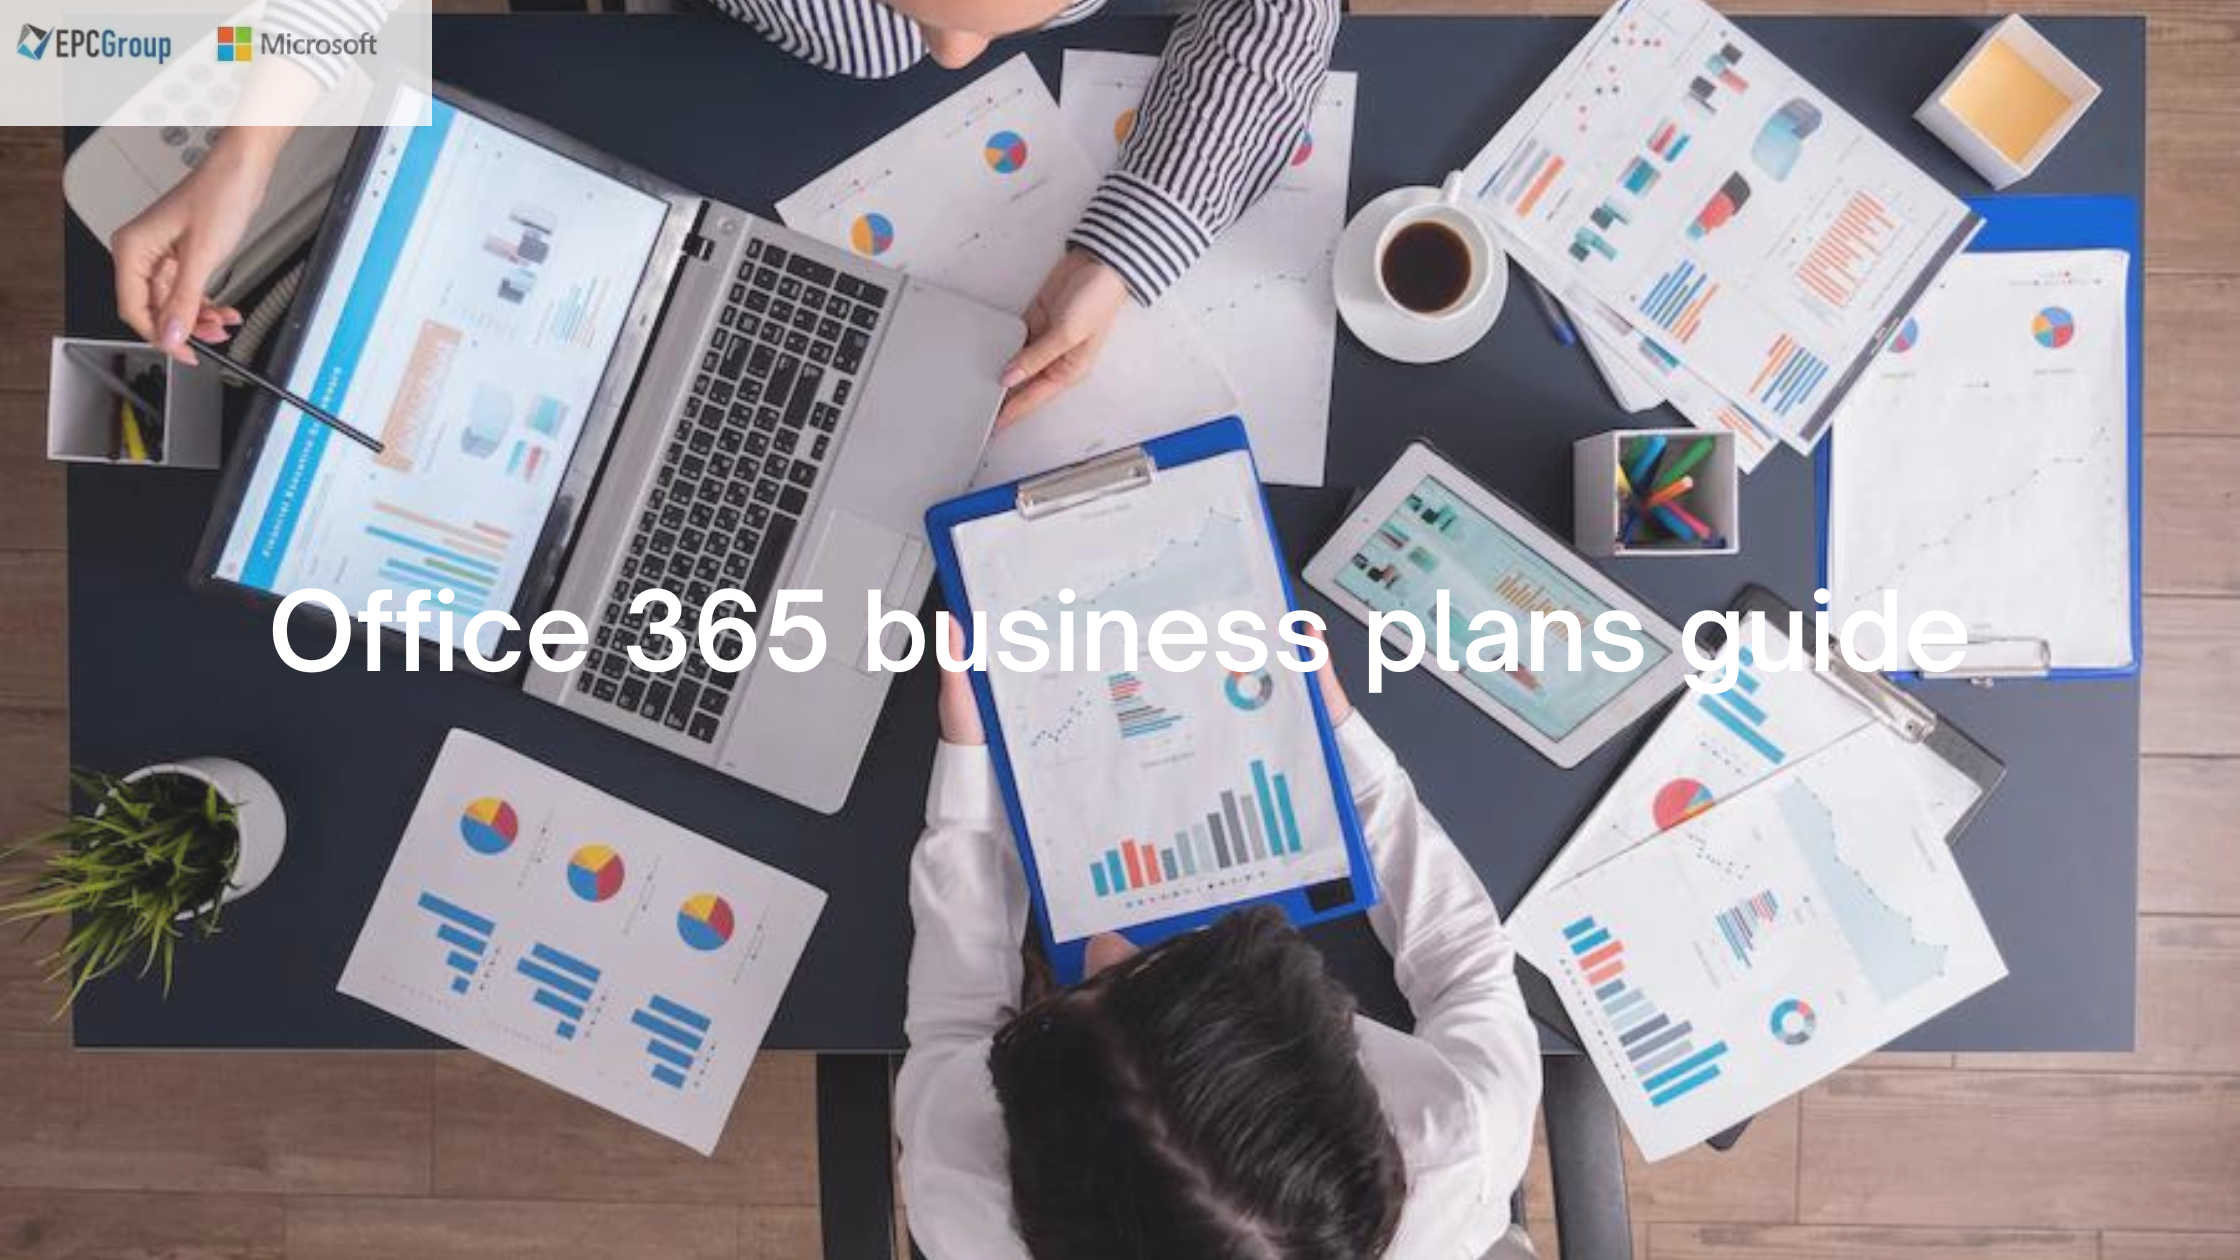 Microsoft’s Guide To The Office 365 Business Plans